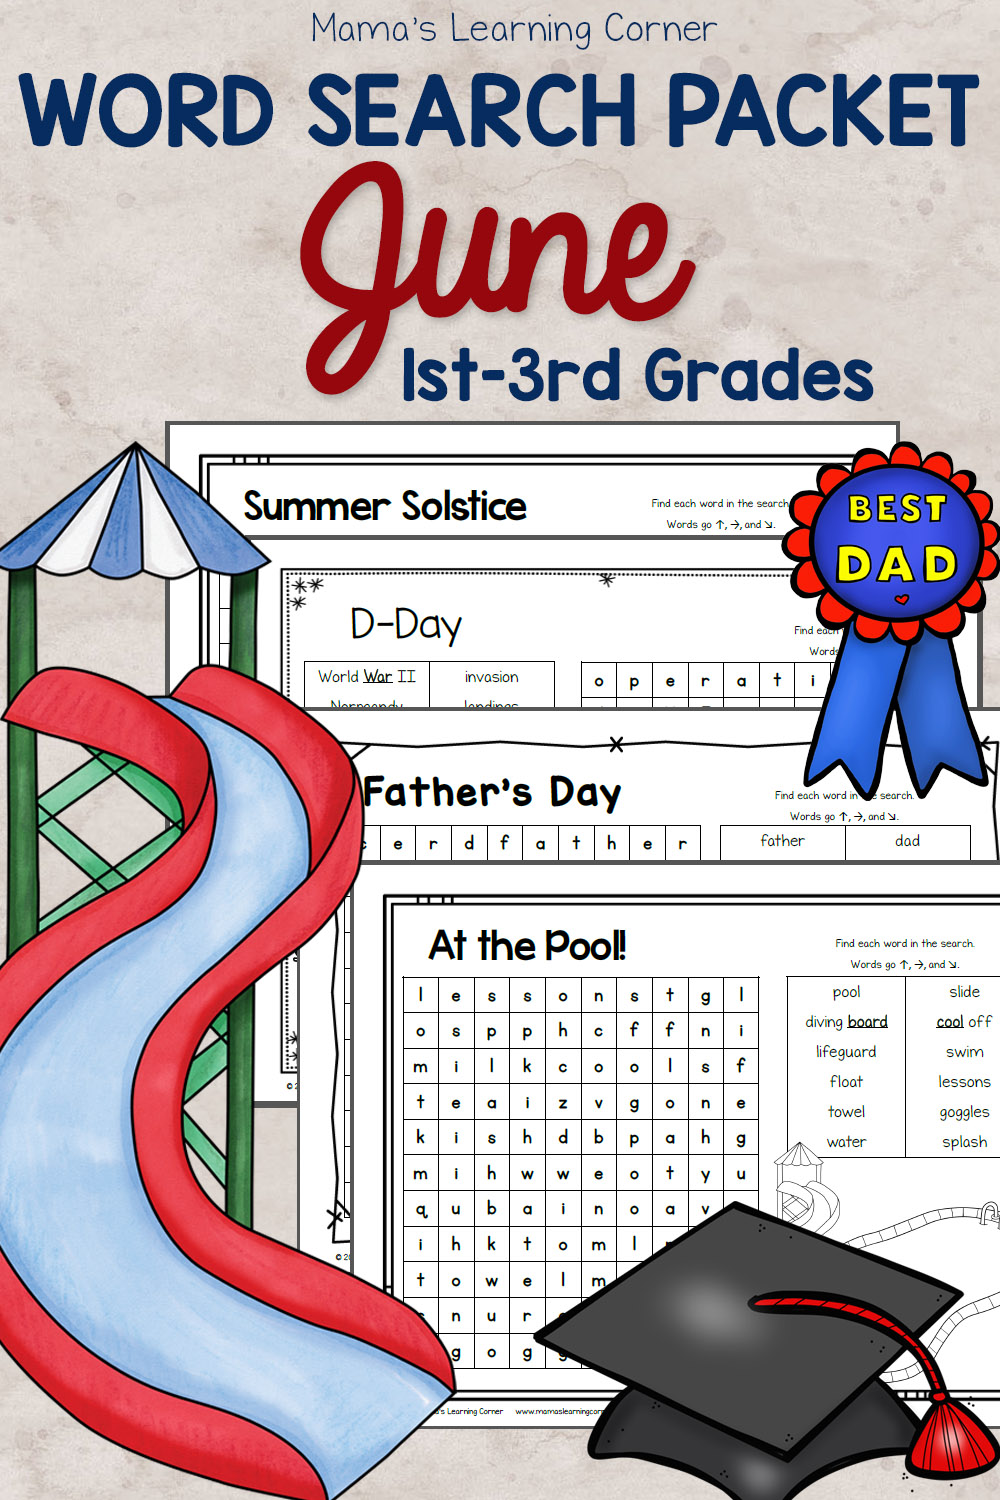 June Word Search Packet - Mamas Learning Corner